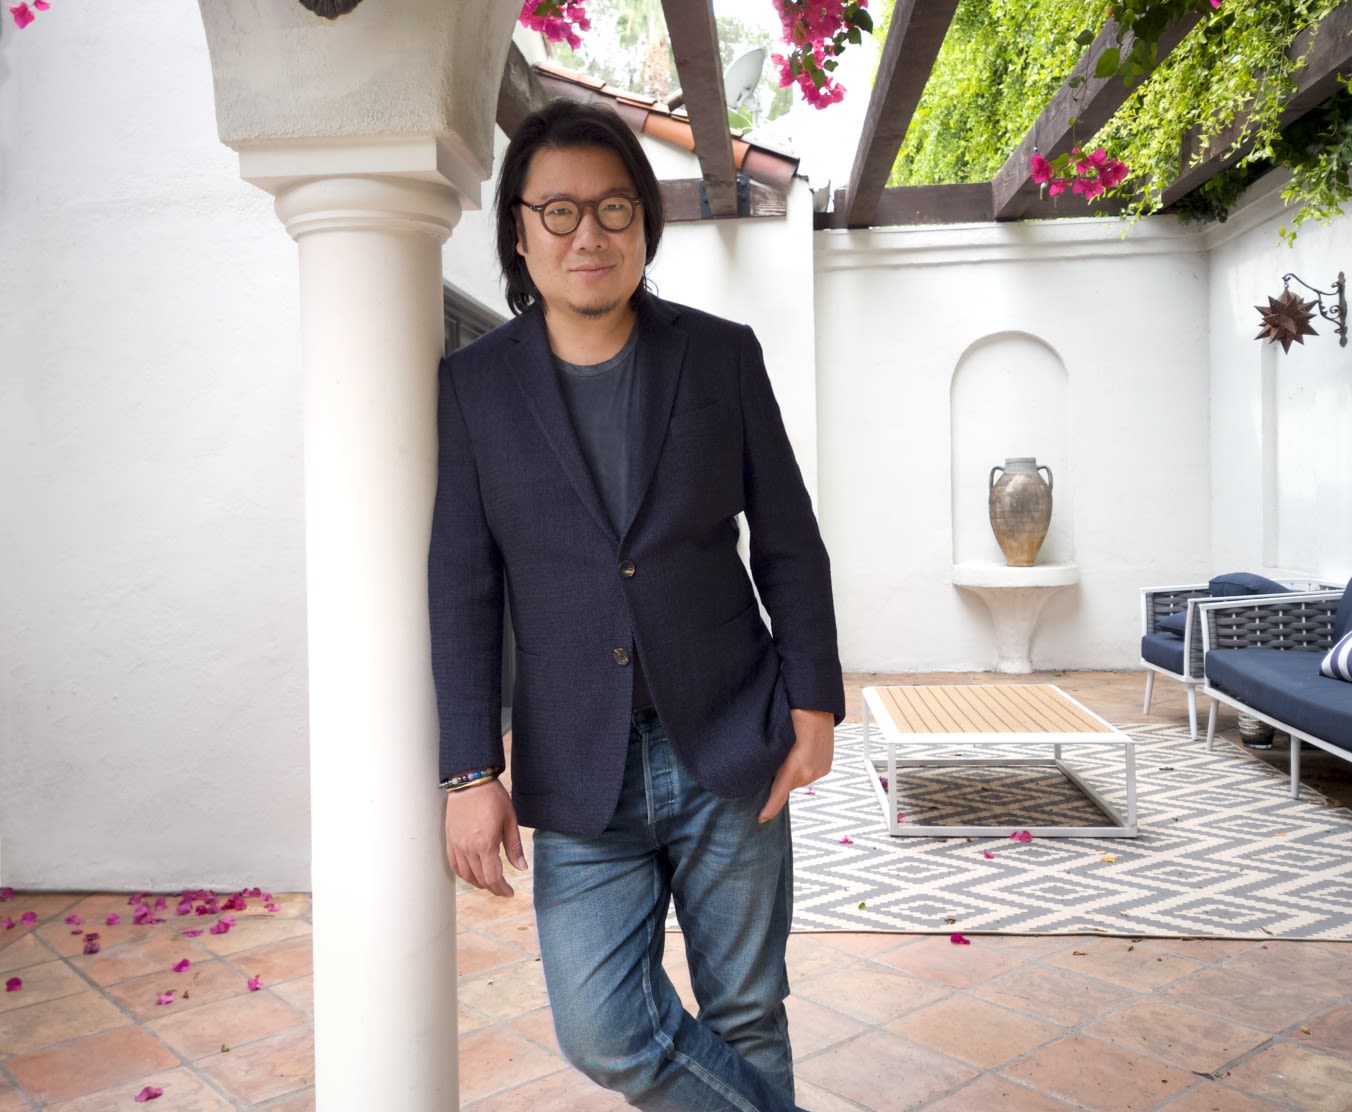 'Crazy Rich Asians' author Kevin Kwan returns home to Houston